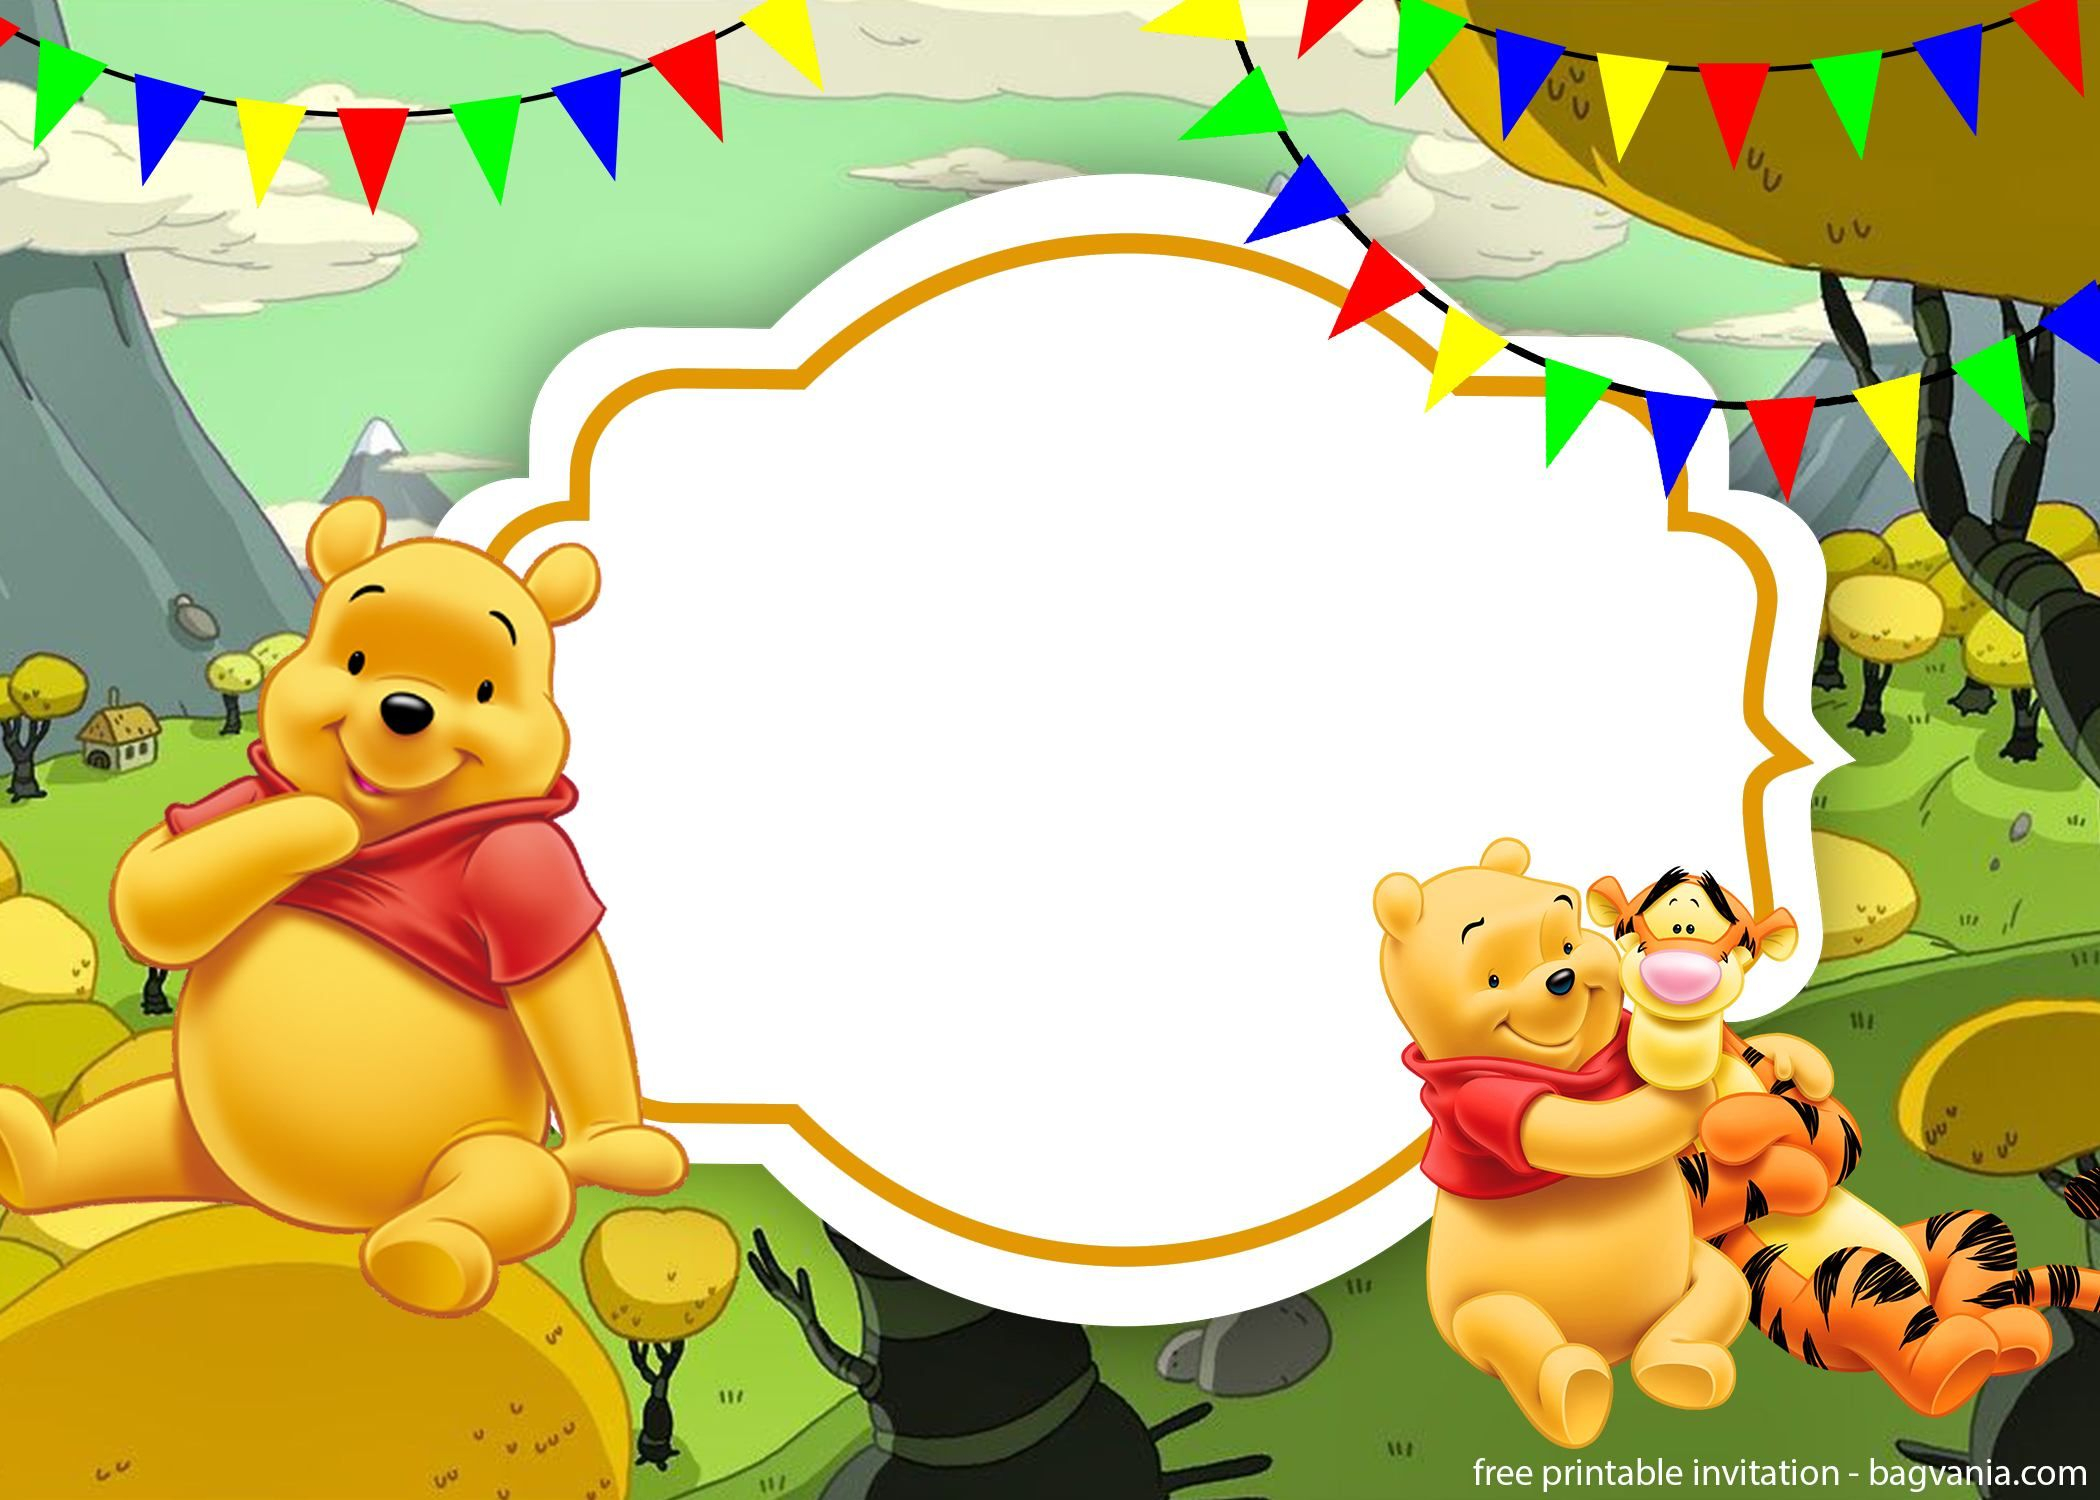 Free Printable Winnie The Pooh Invitation Template Bagvania intended for proportions 2100 X 1500